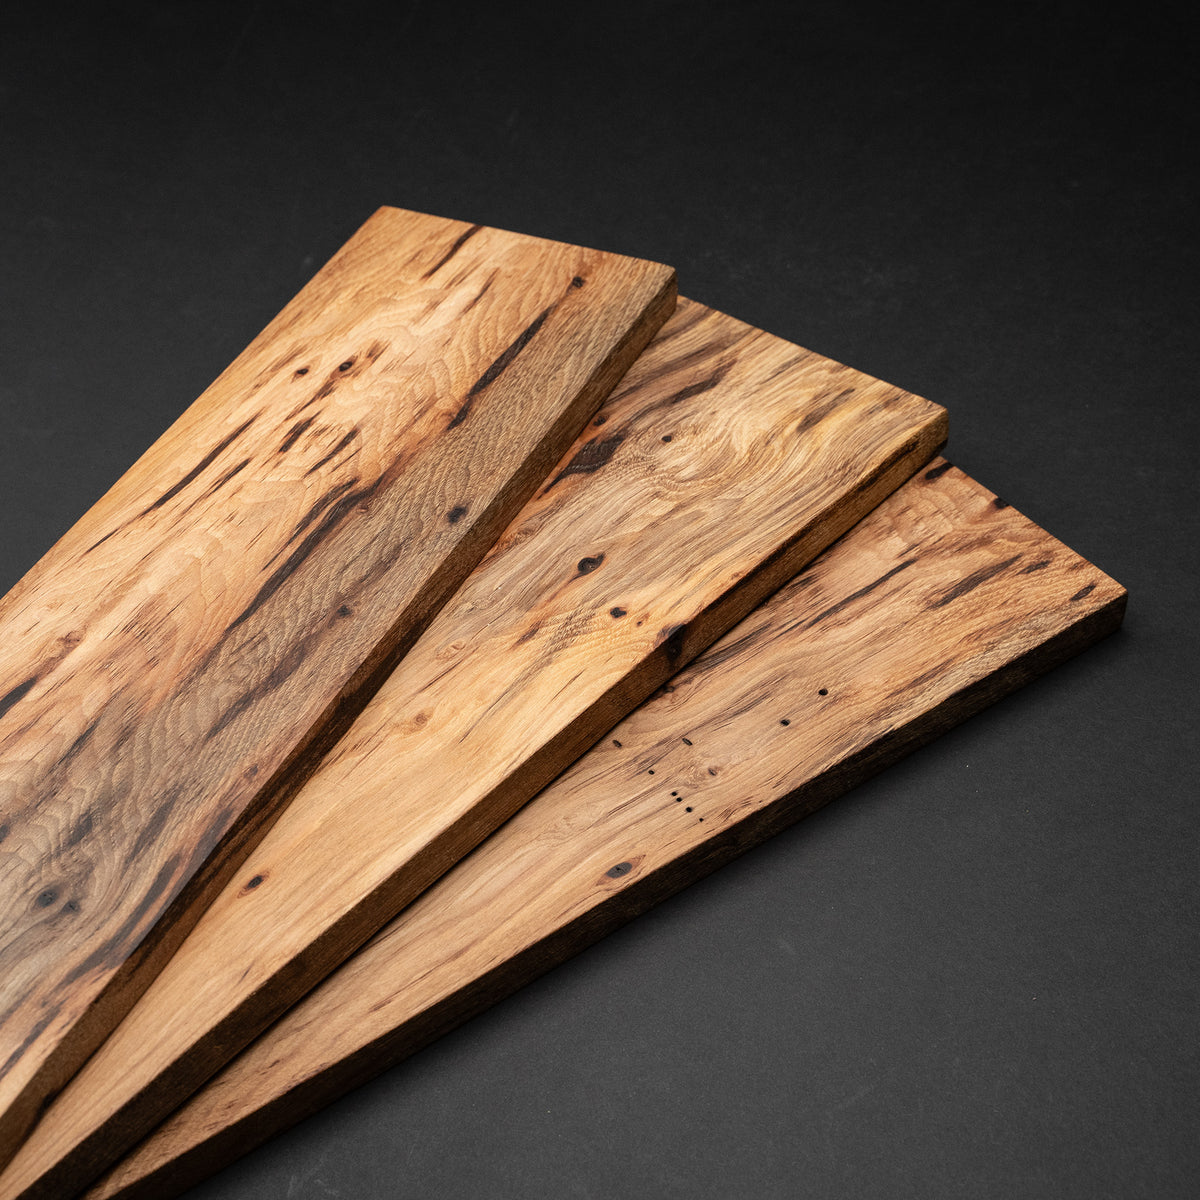 4/4 1” Rustic Hickory Boards - Kiln Dried Dimensional Lumber - Cut to Size Rustic Hickory Board